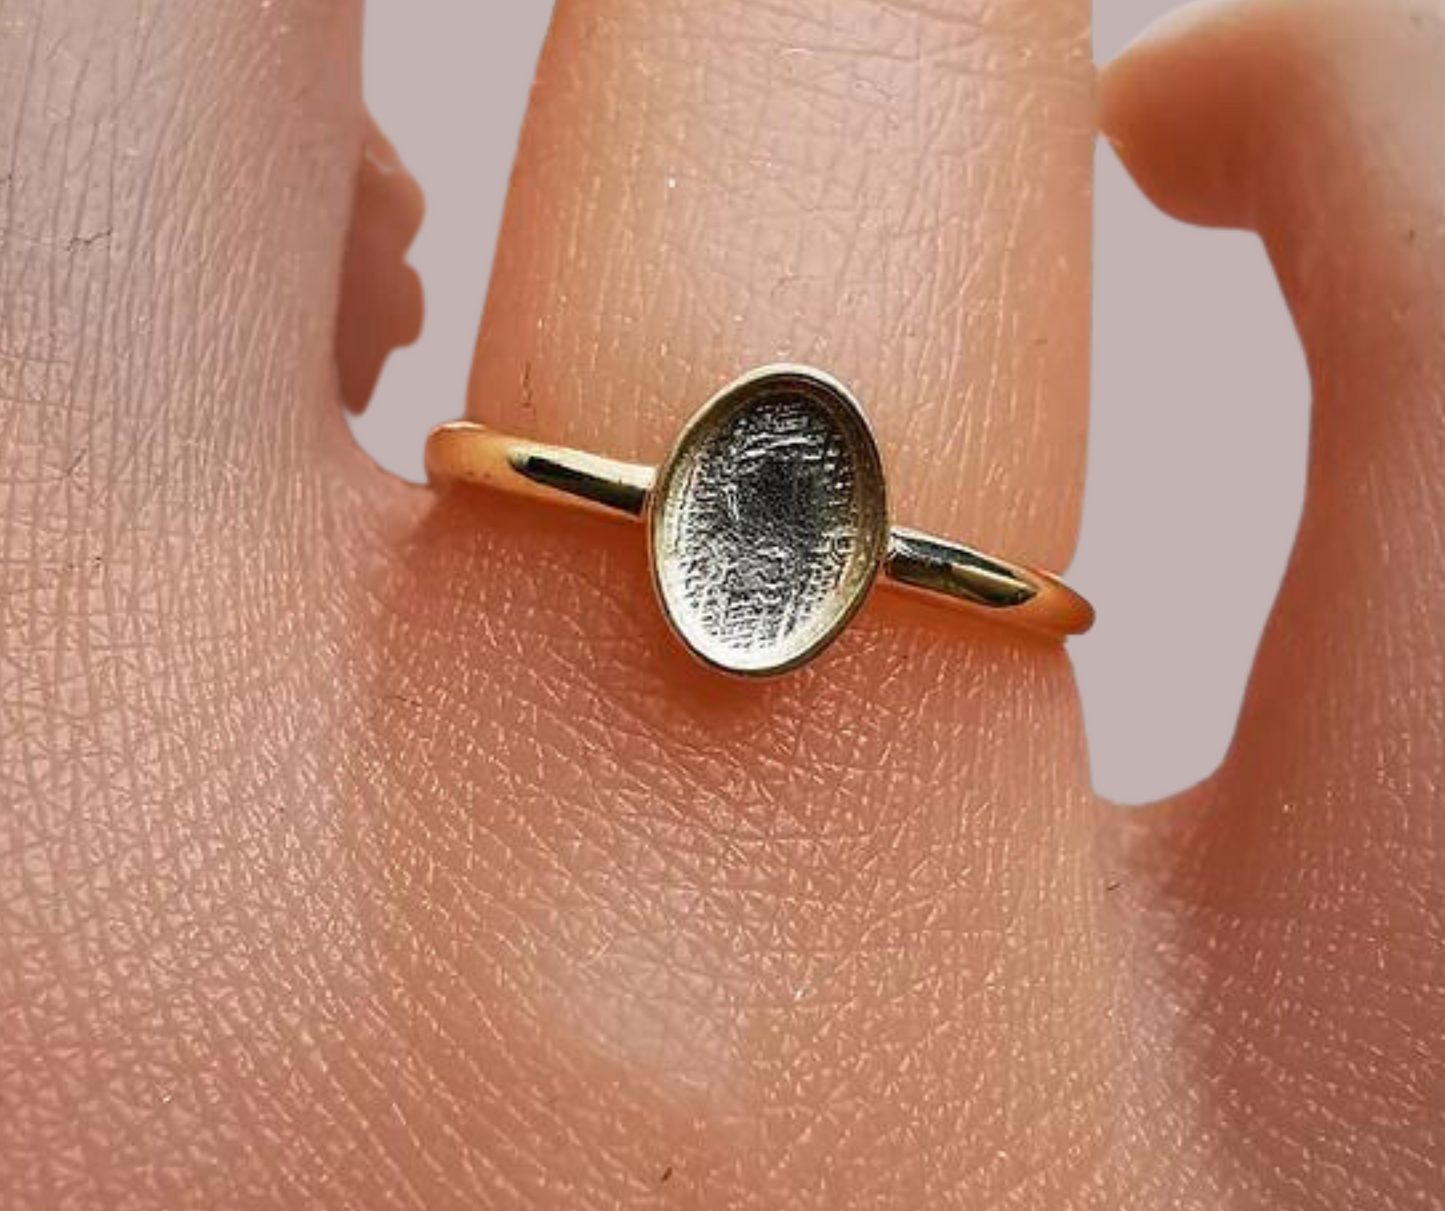 The simple oval ring solid gold